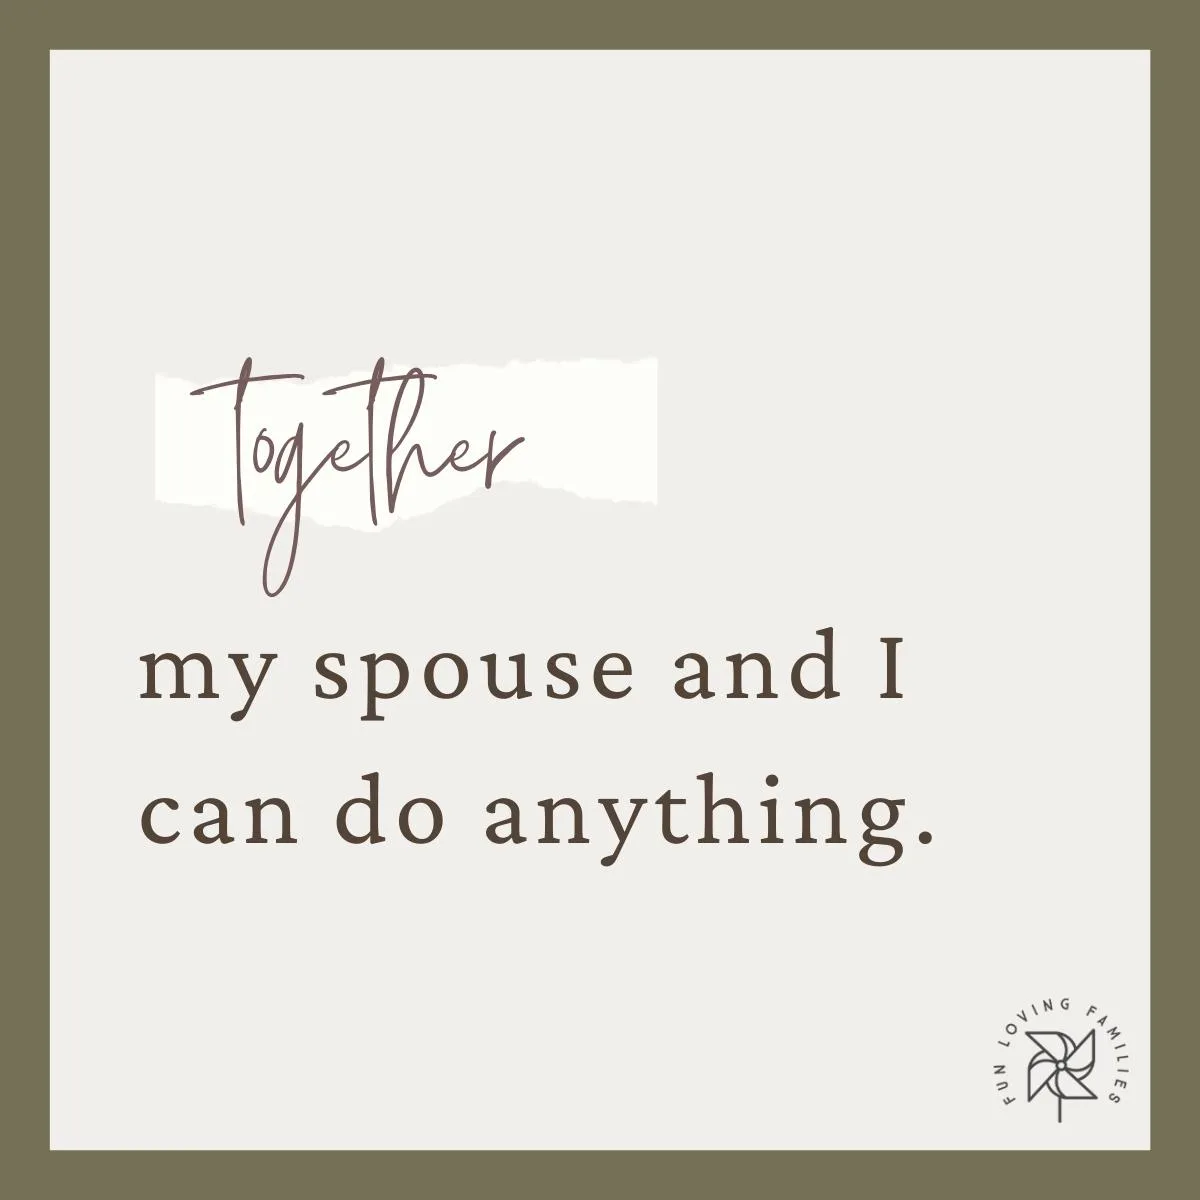 Together, my spouse and I can do anything affirmation